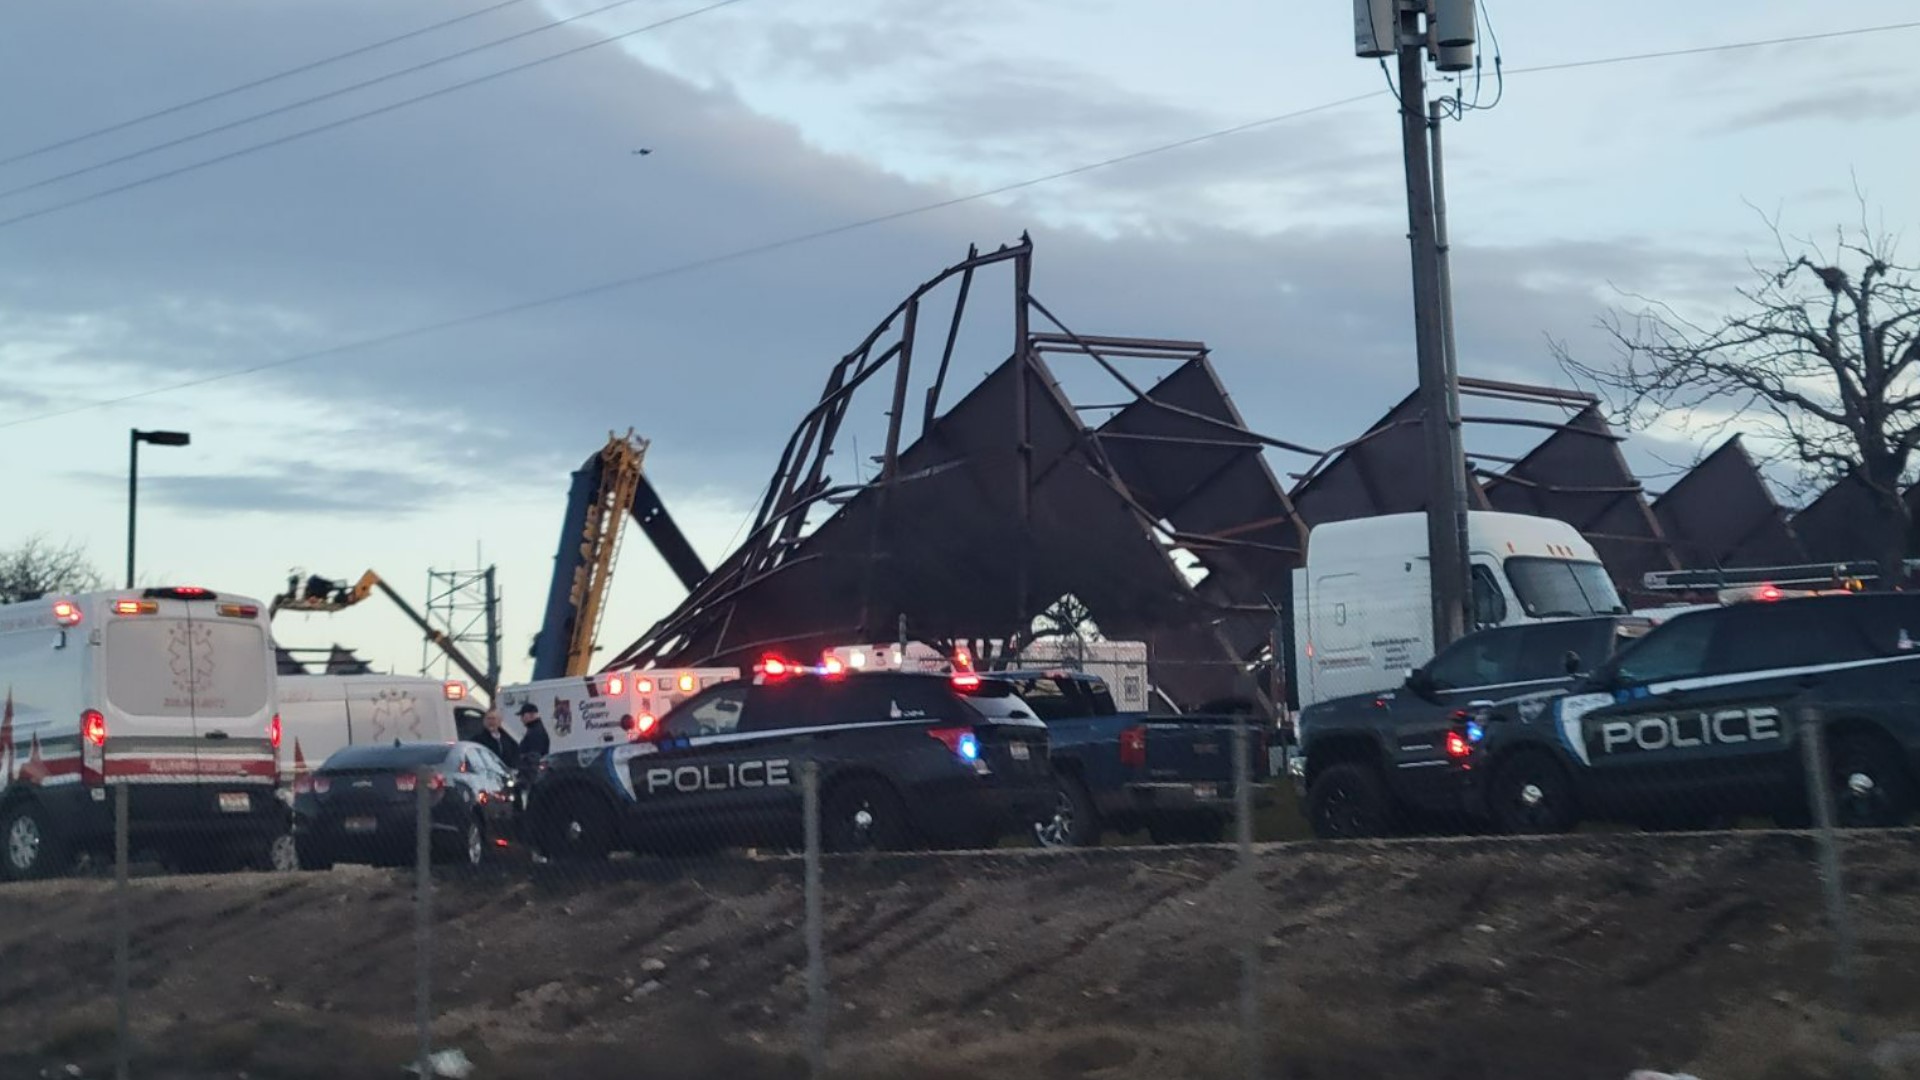 Officials say 3 people have been killed and 9 were injured in a collapse of a hangar under construction on the grounds of the airport in Boise, Idaho.